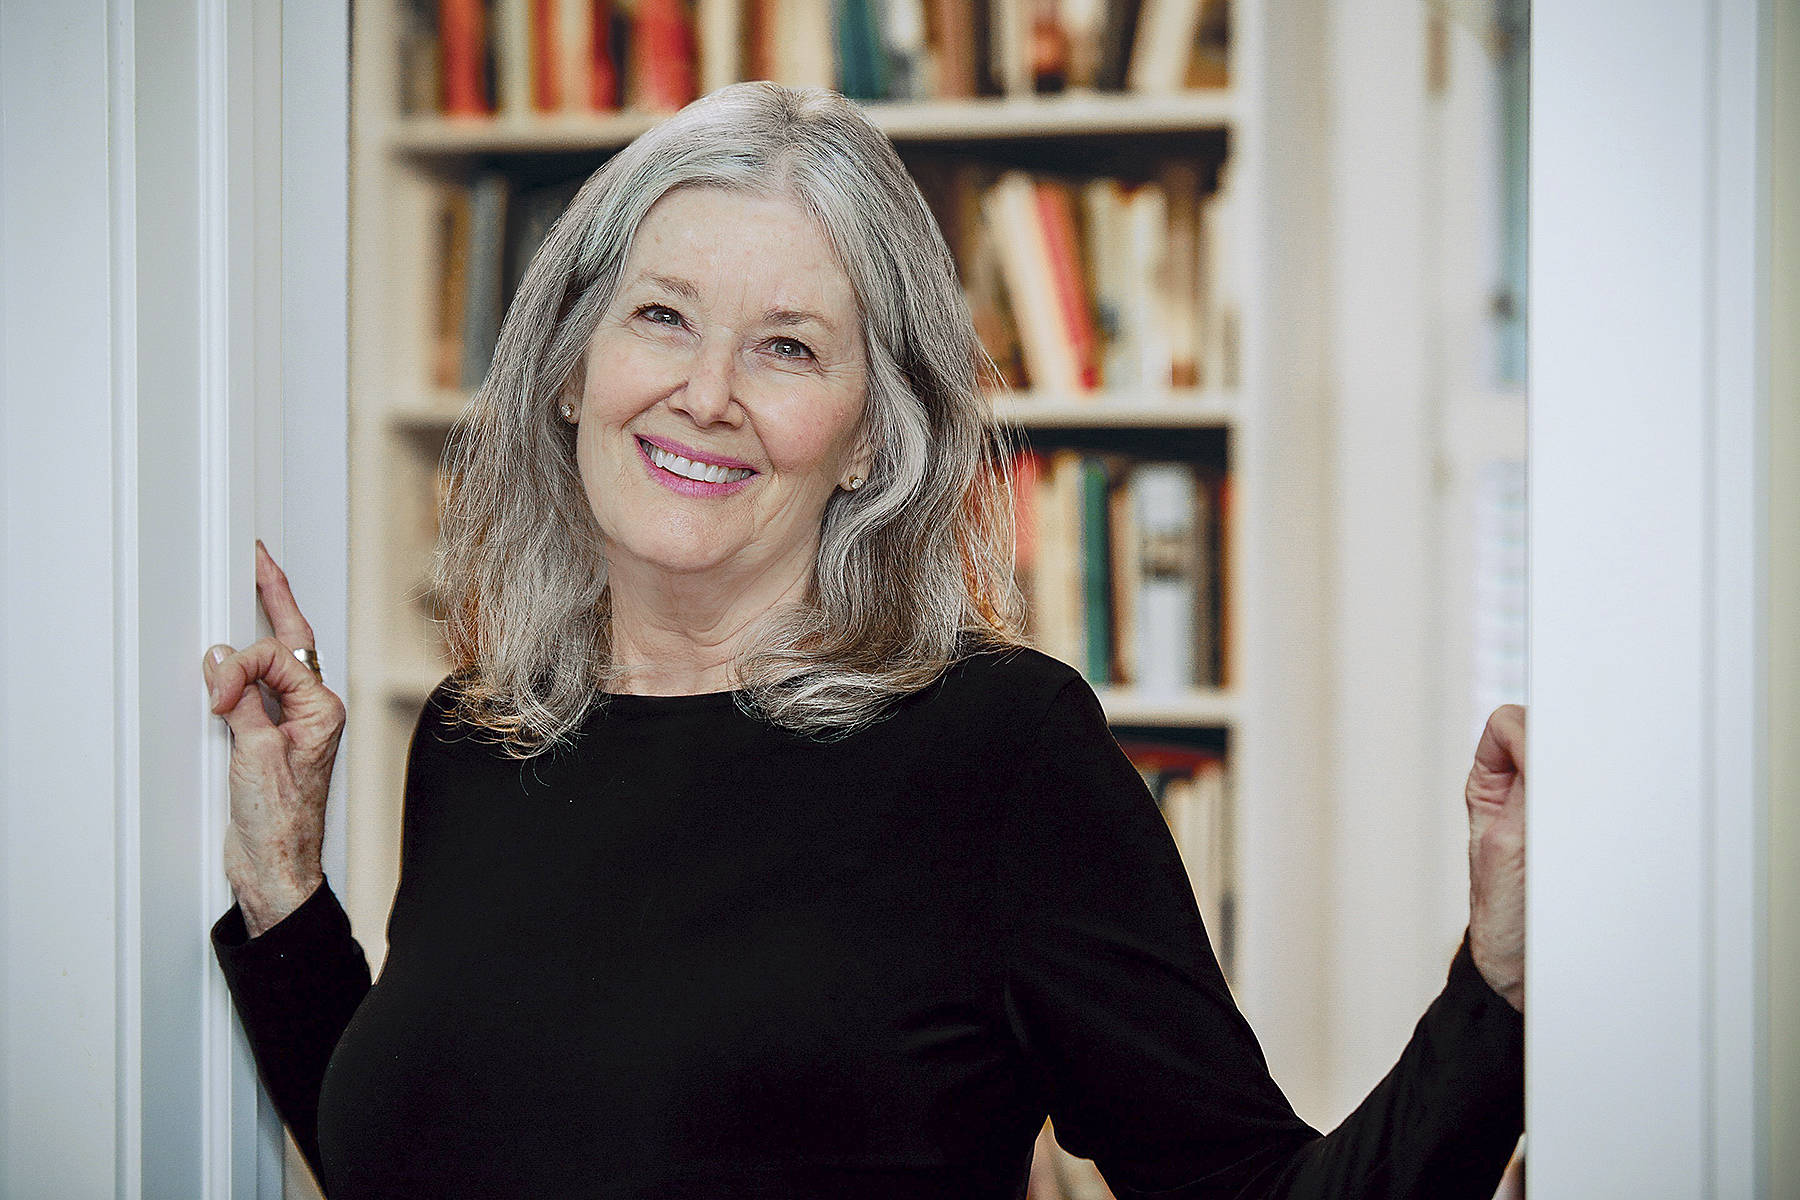 Elizabeth Berg, the best-selling author of “I’ll Be Seeing You: A Memoir,” will launch Vashon Community Care’s new “Words and Wine” series. Teresa Crawford Photo